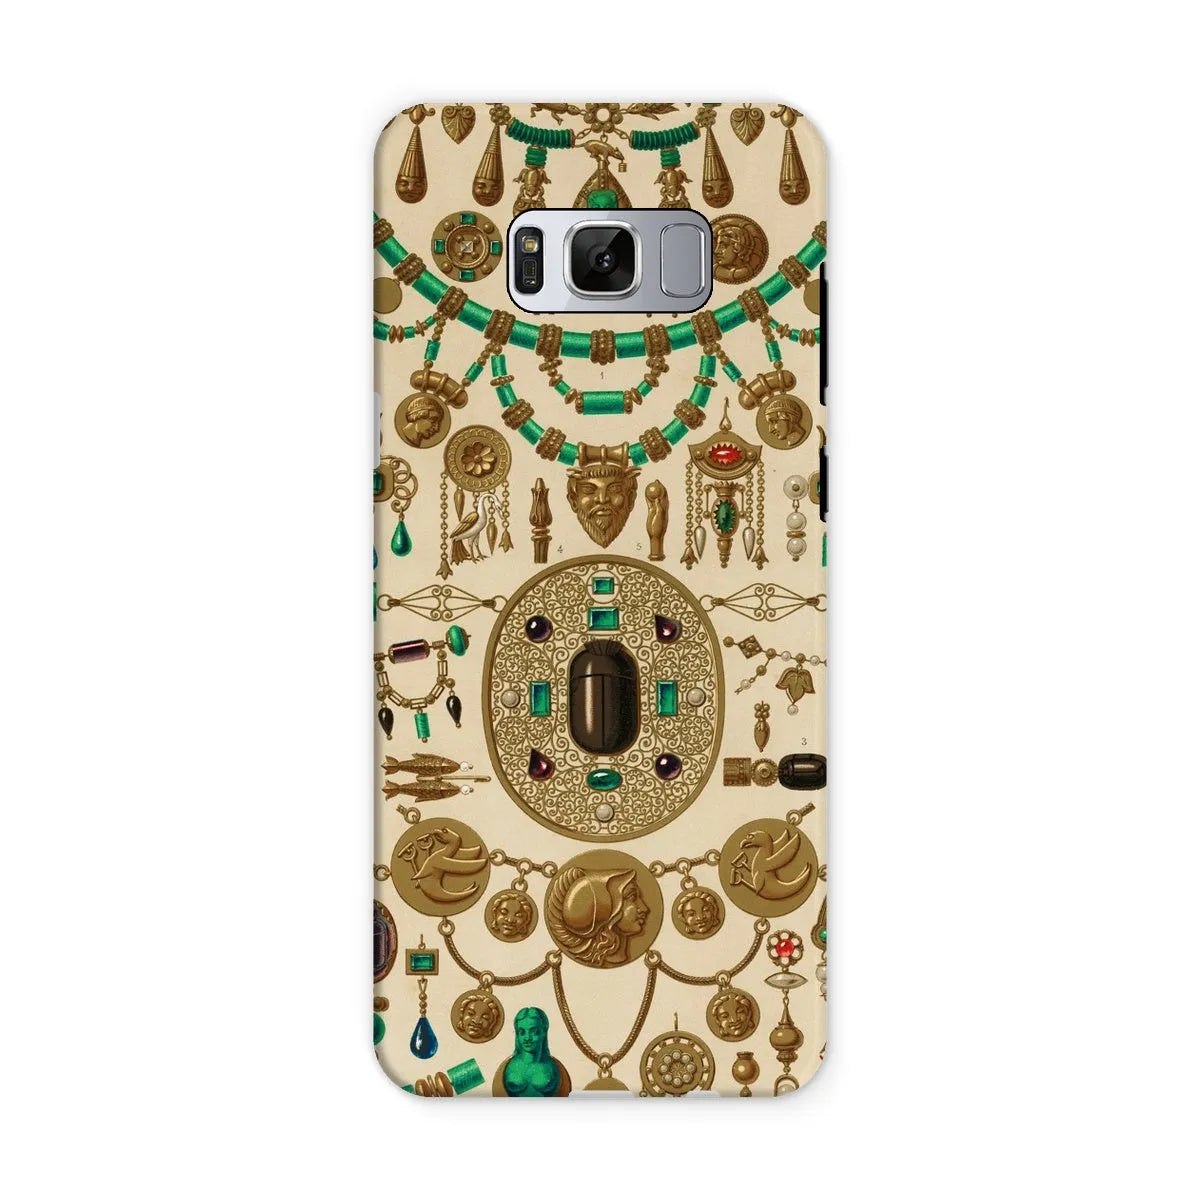 Etruscan Jewelry By Auguste Racinet Art Phone Case - Samsung Galaxy S8 / Matte - Mobile Phone Cases - Aesthetic Art